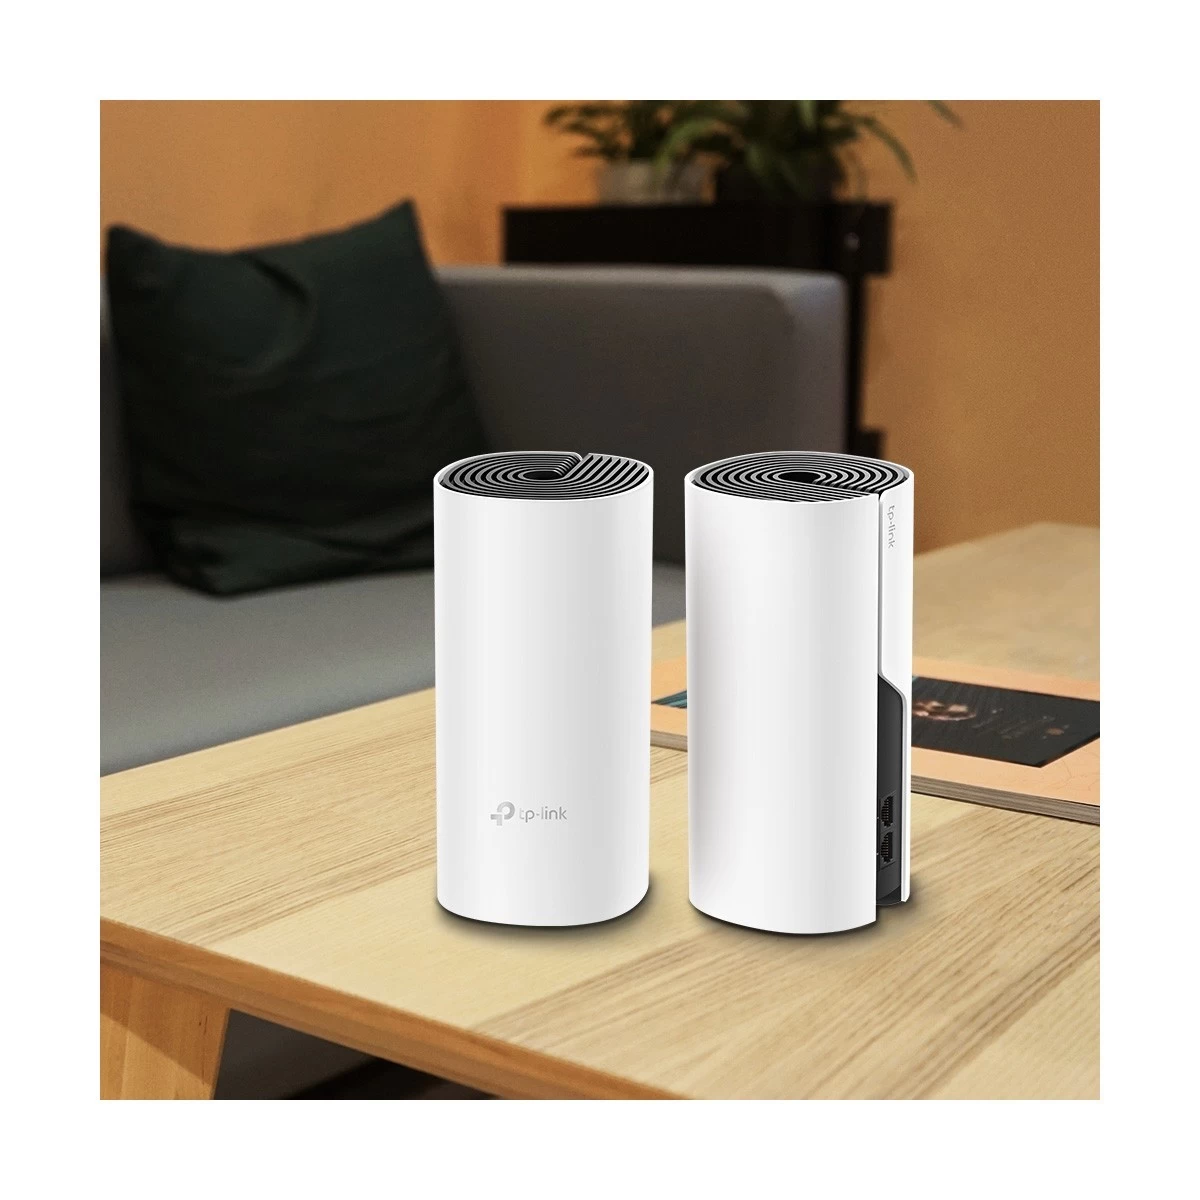 TP-Link Deco M4 (2 Pack) Whole Home Mesh Wi-Fi System Router price in BD